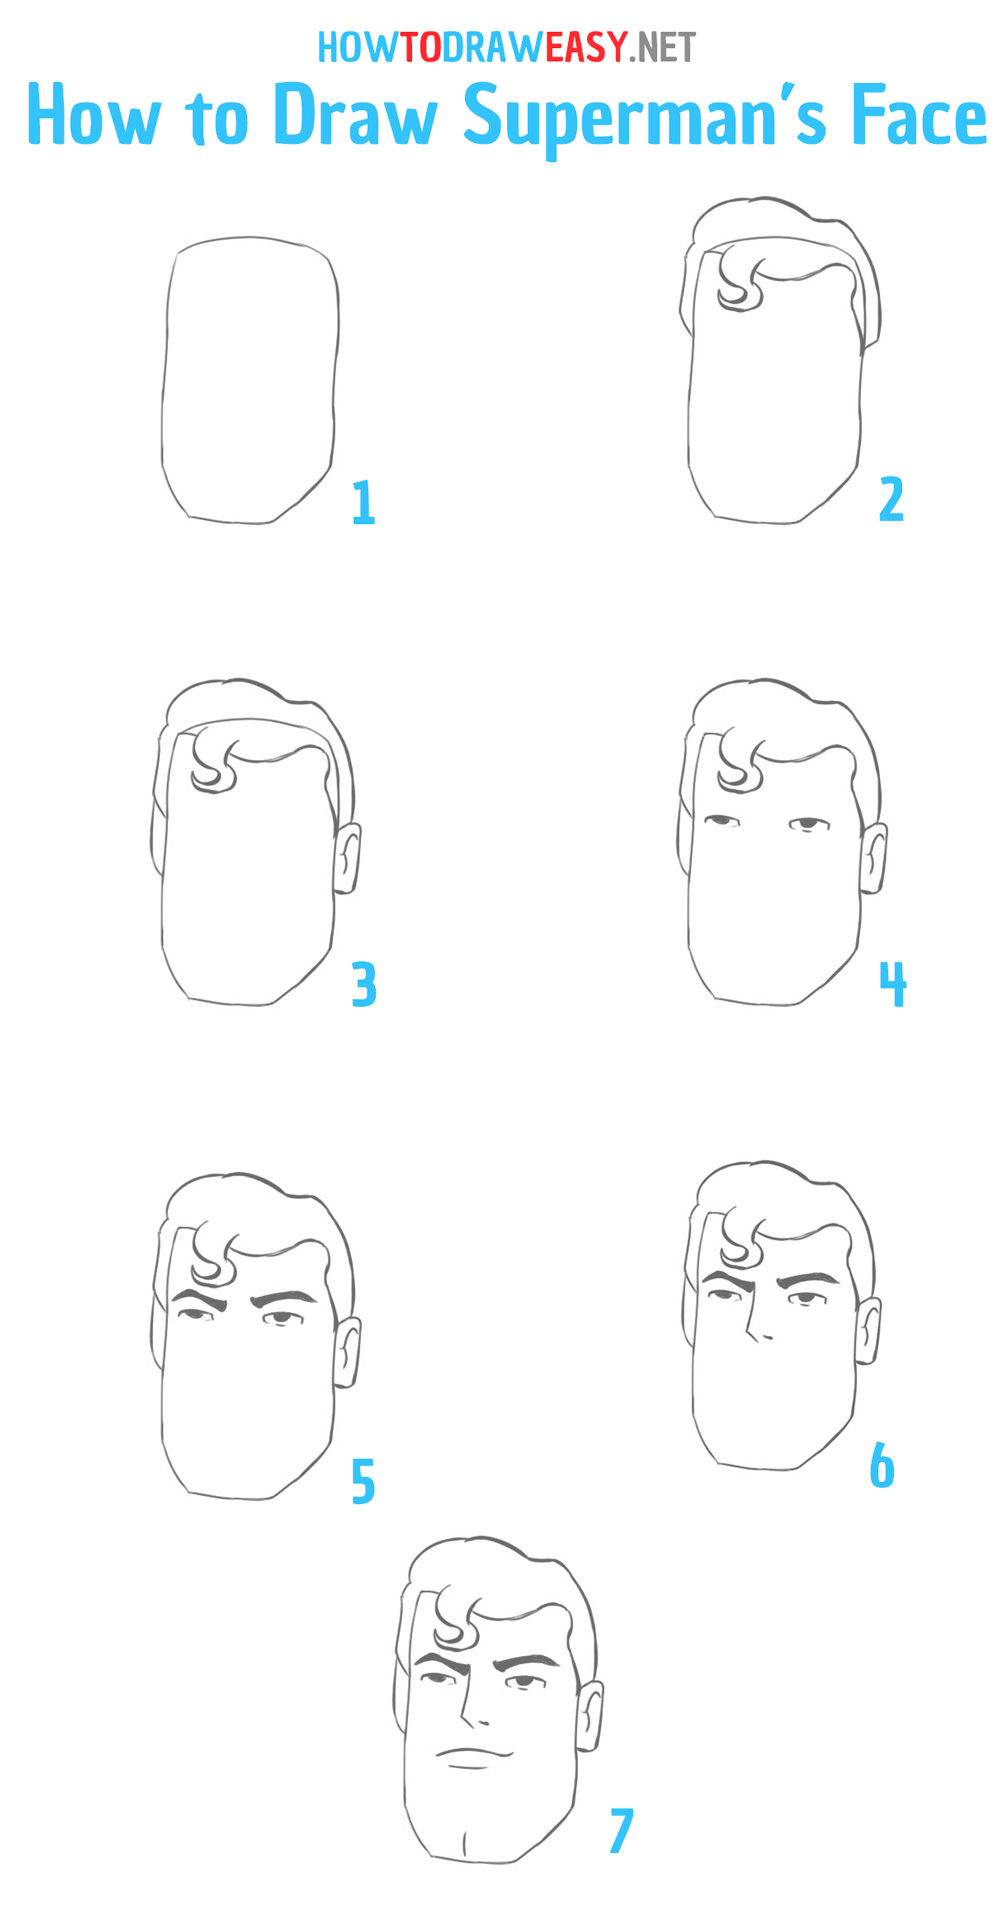 How to Draw Superman's Face Step by Step